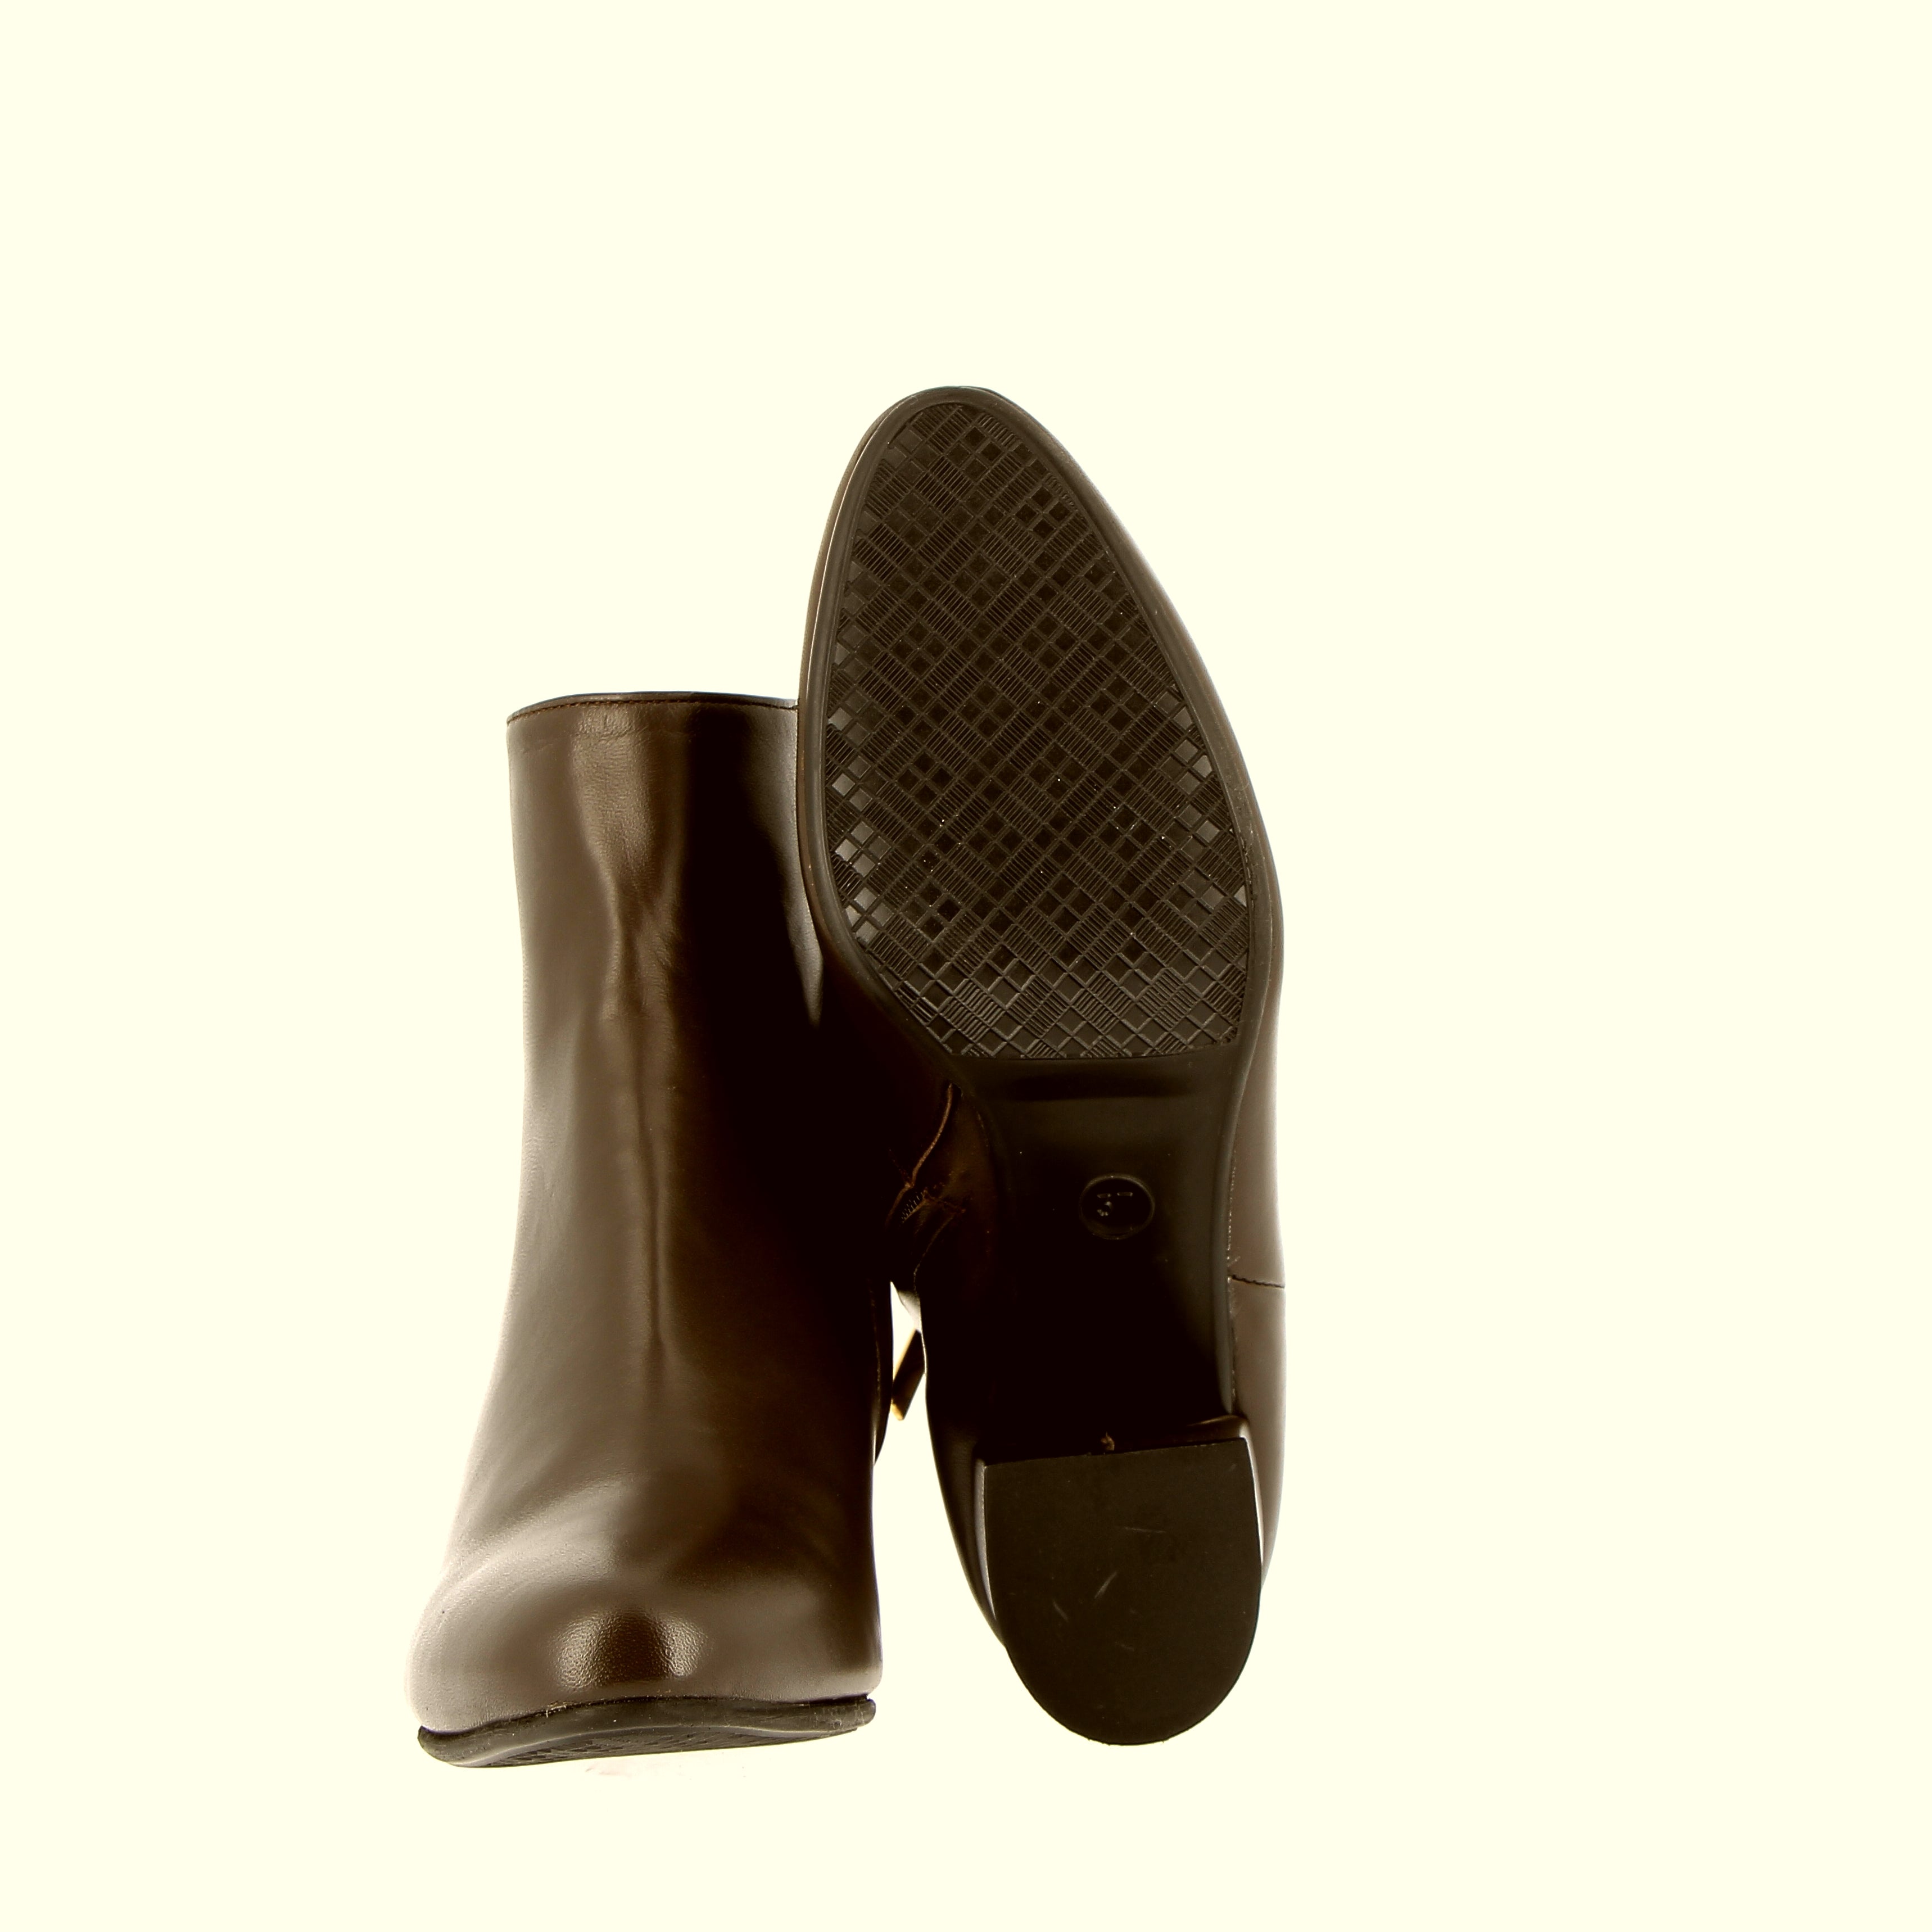 Ankle boot in chocolate brown nappa leather